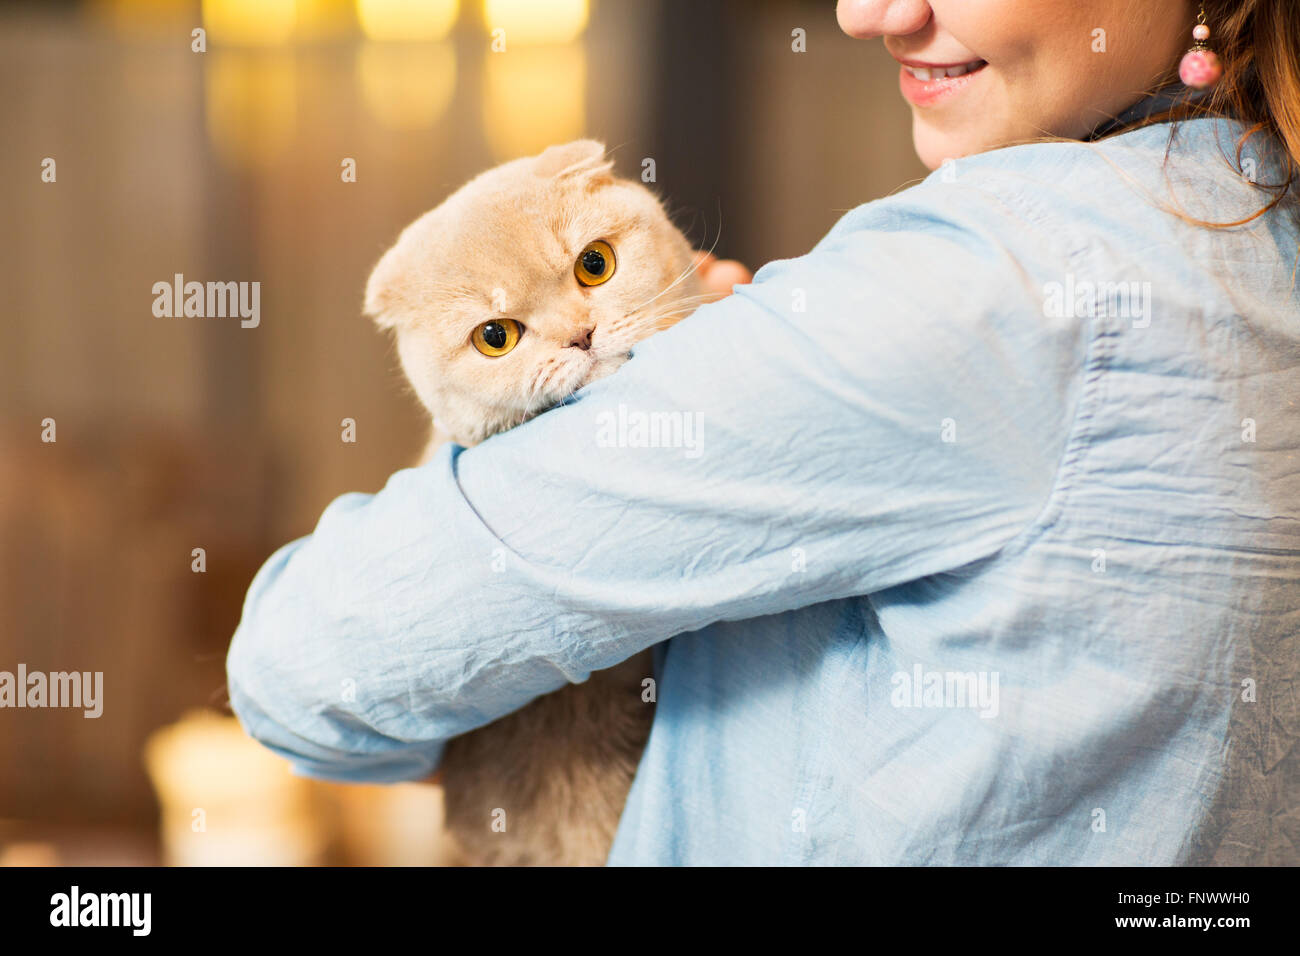 happy woman holding scottish fold cat at home Stock Photo